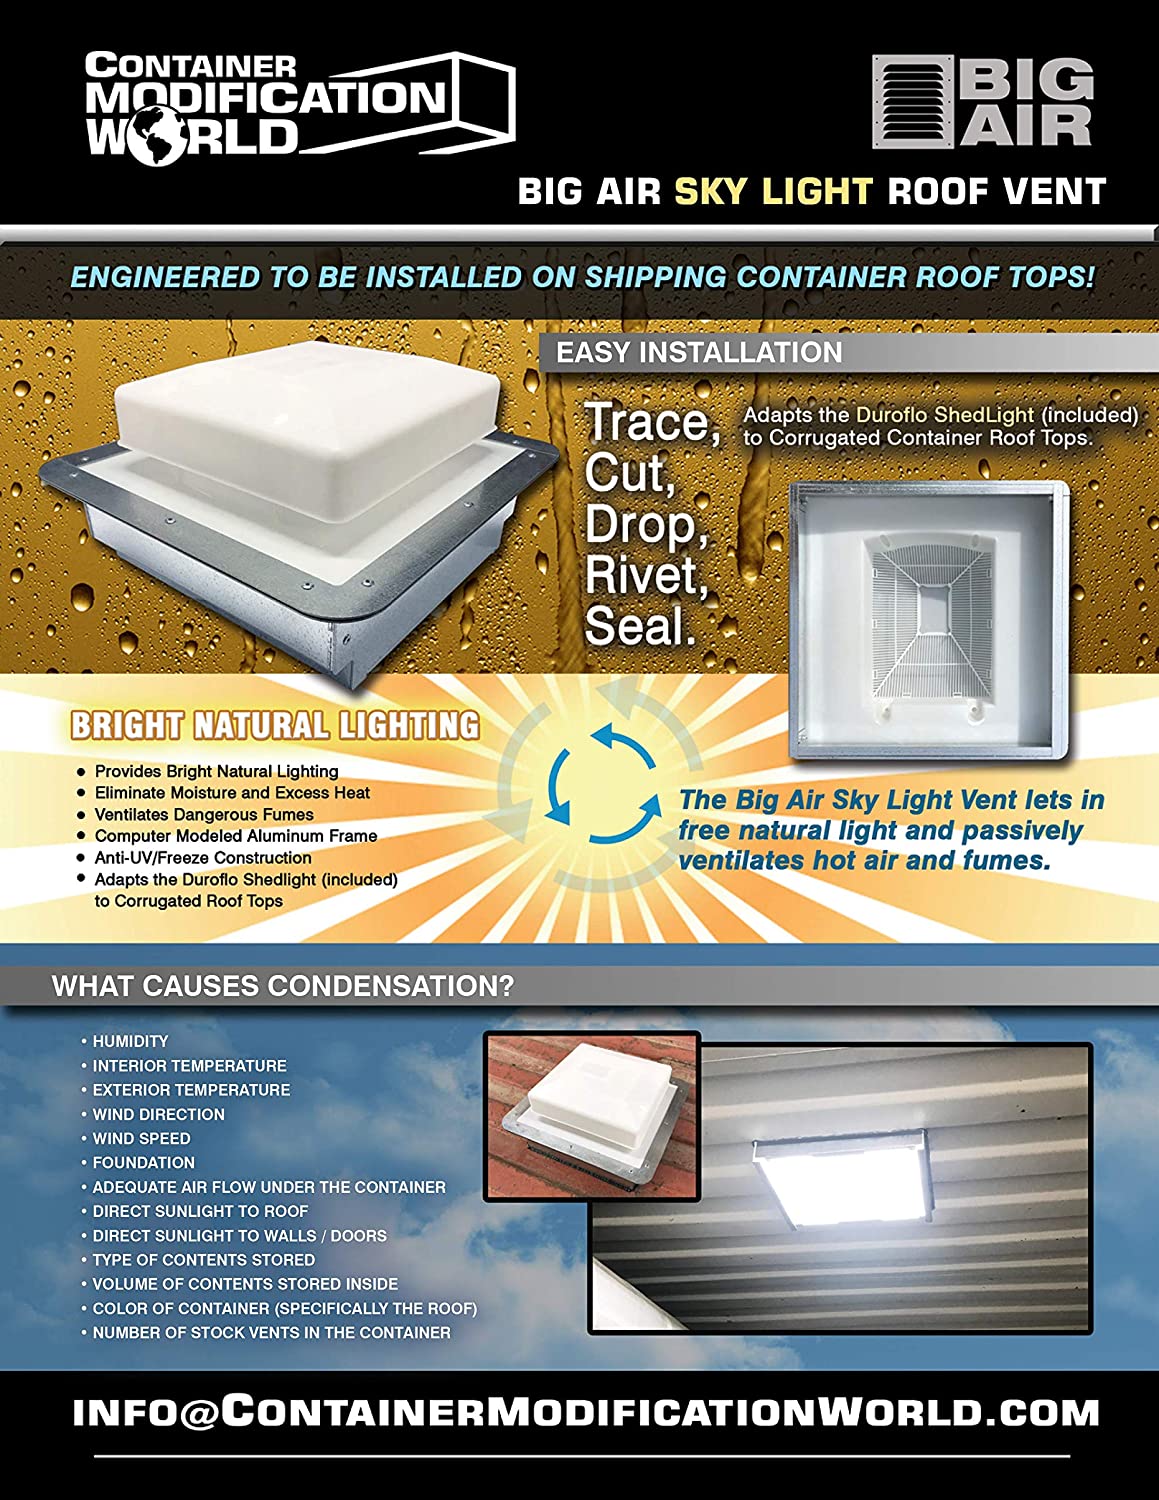 Shipping Container Sky Light Vent